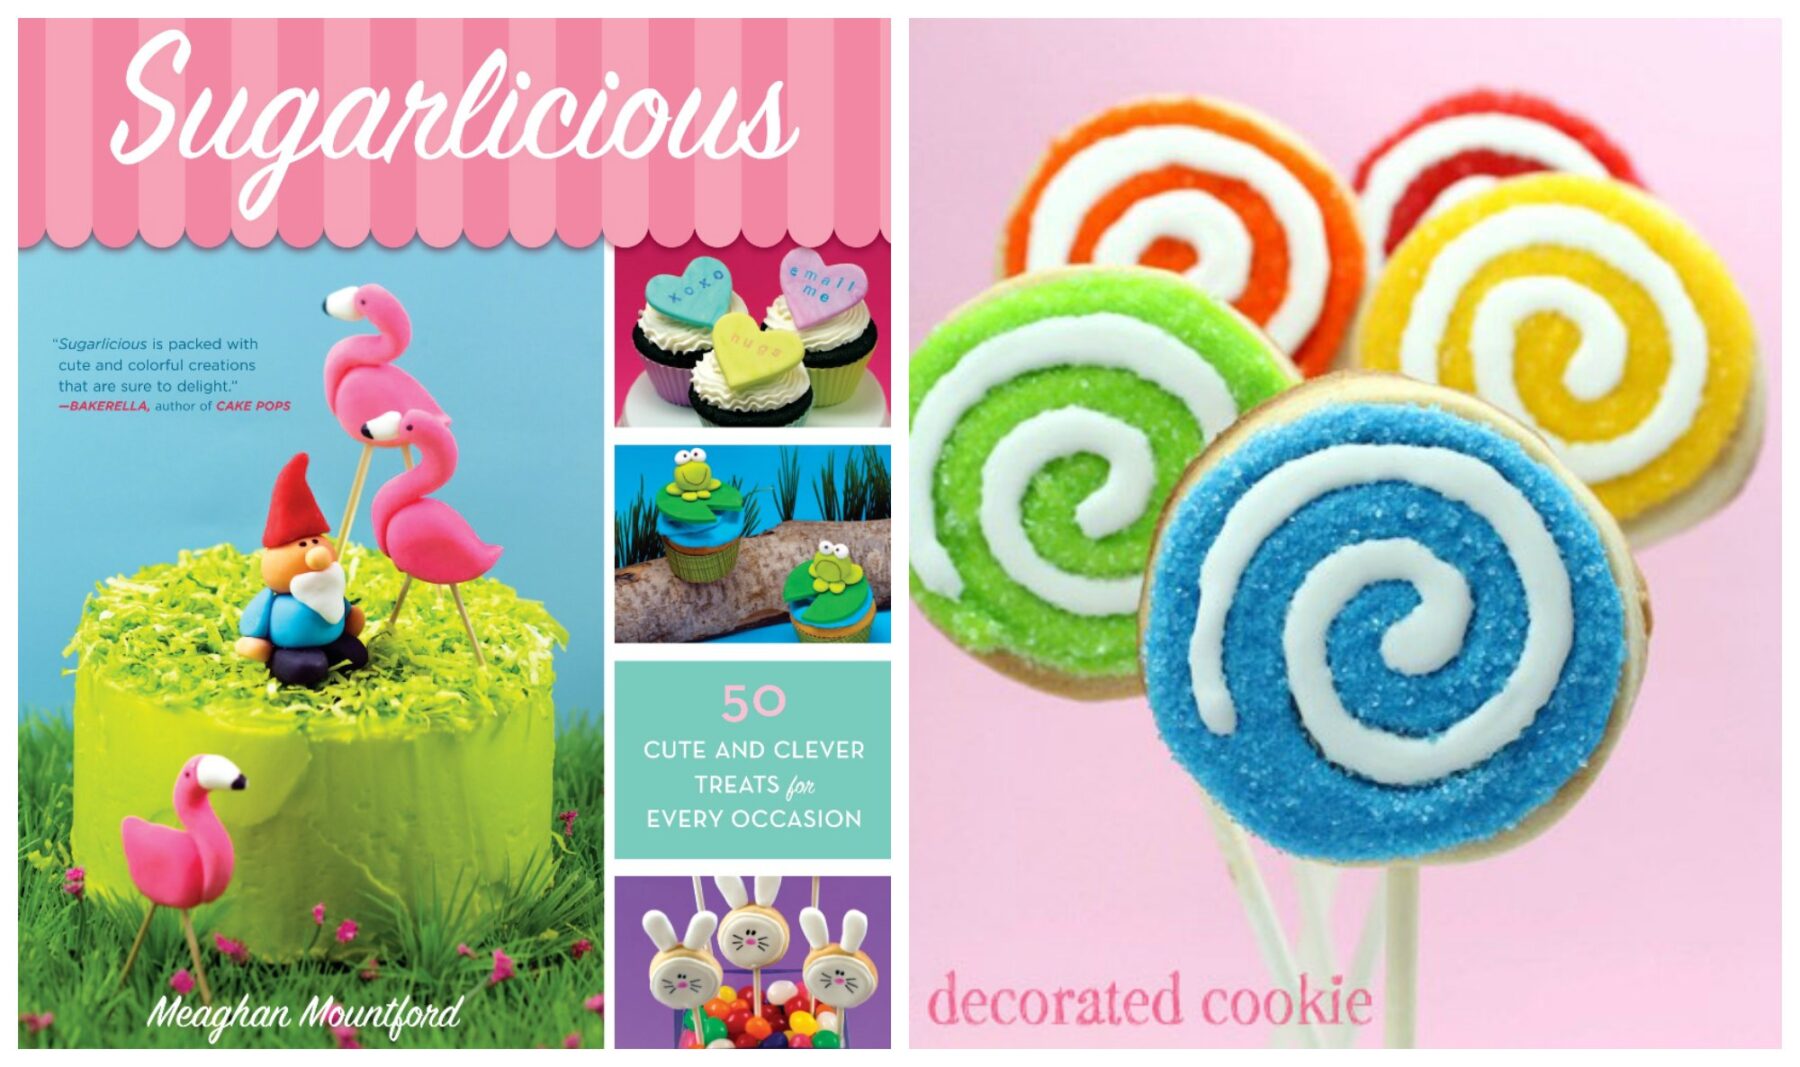 Sugarlicious - The Decorated Cookie